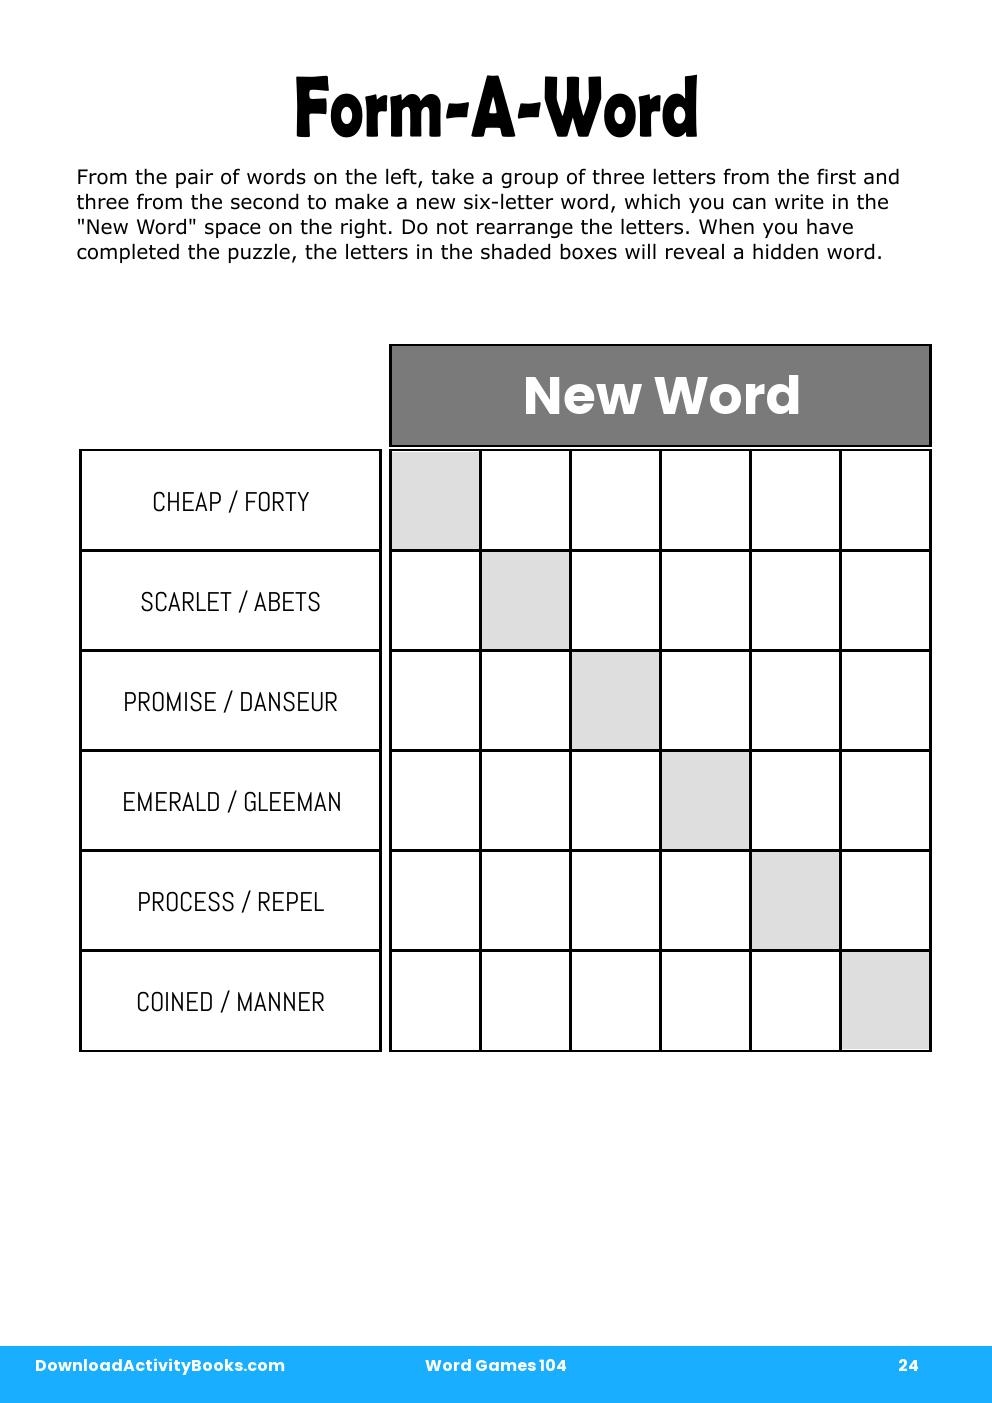 Form-A-Word in Word Games 104